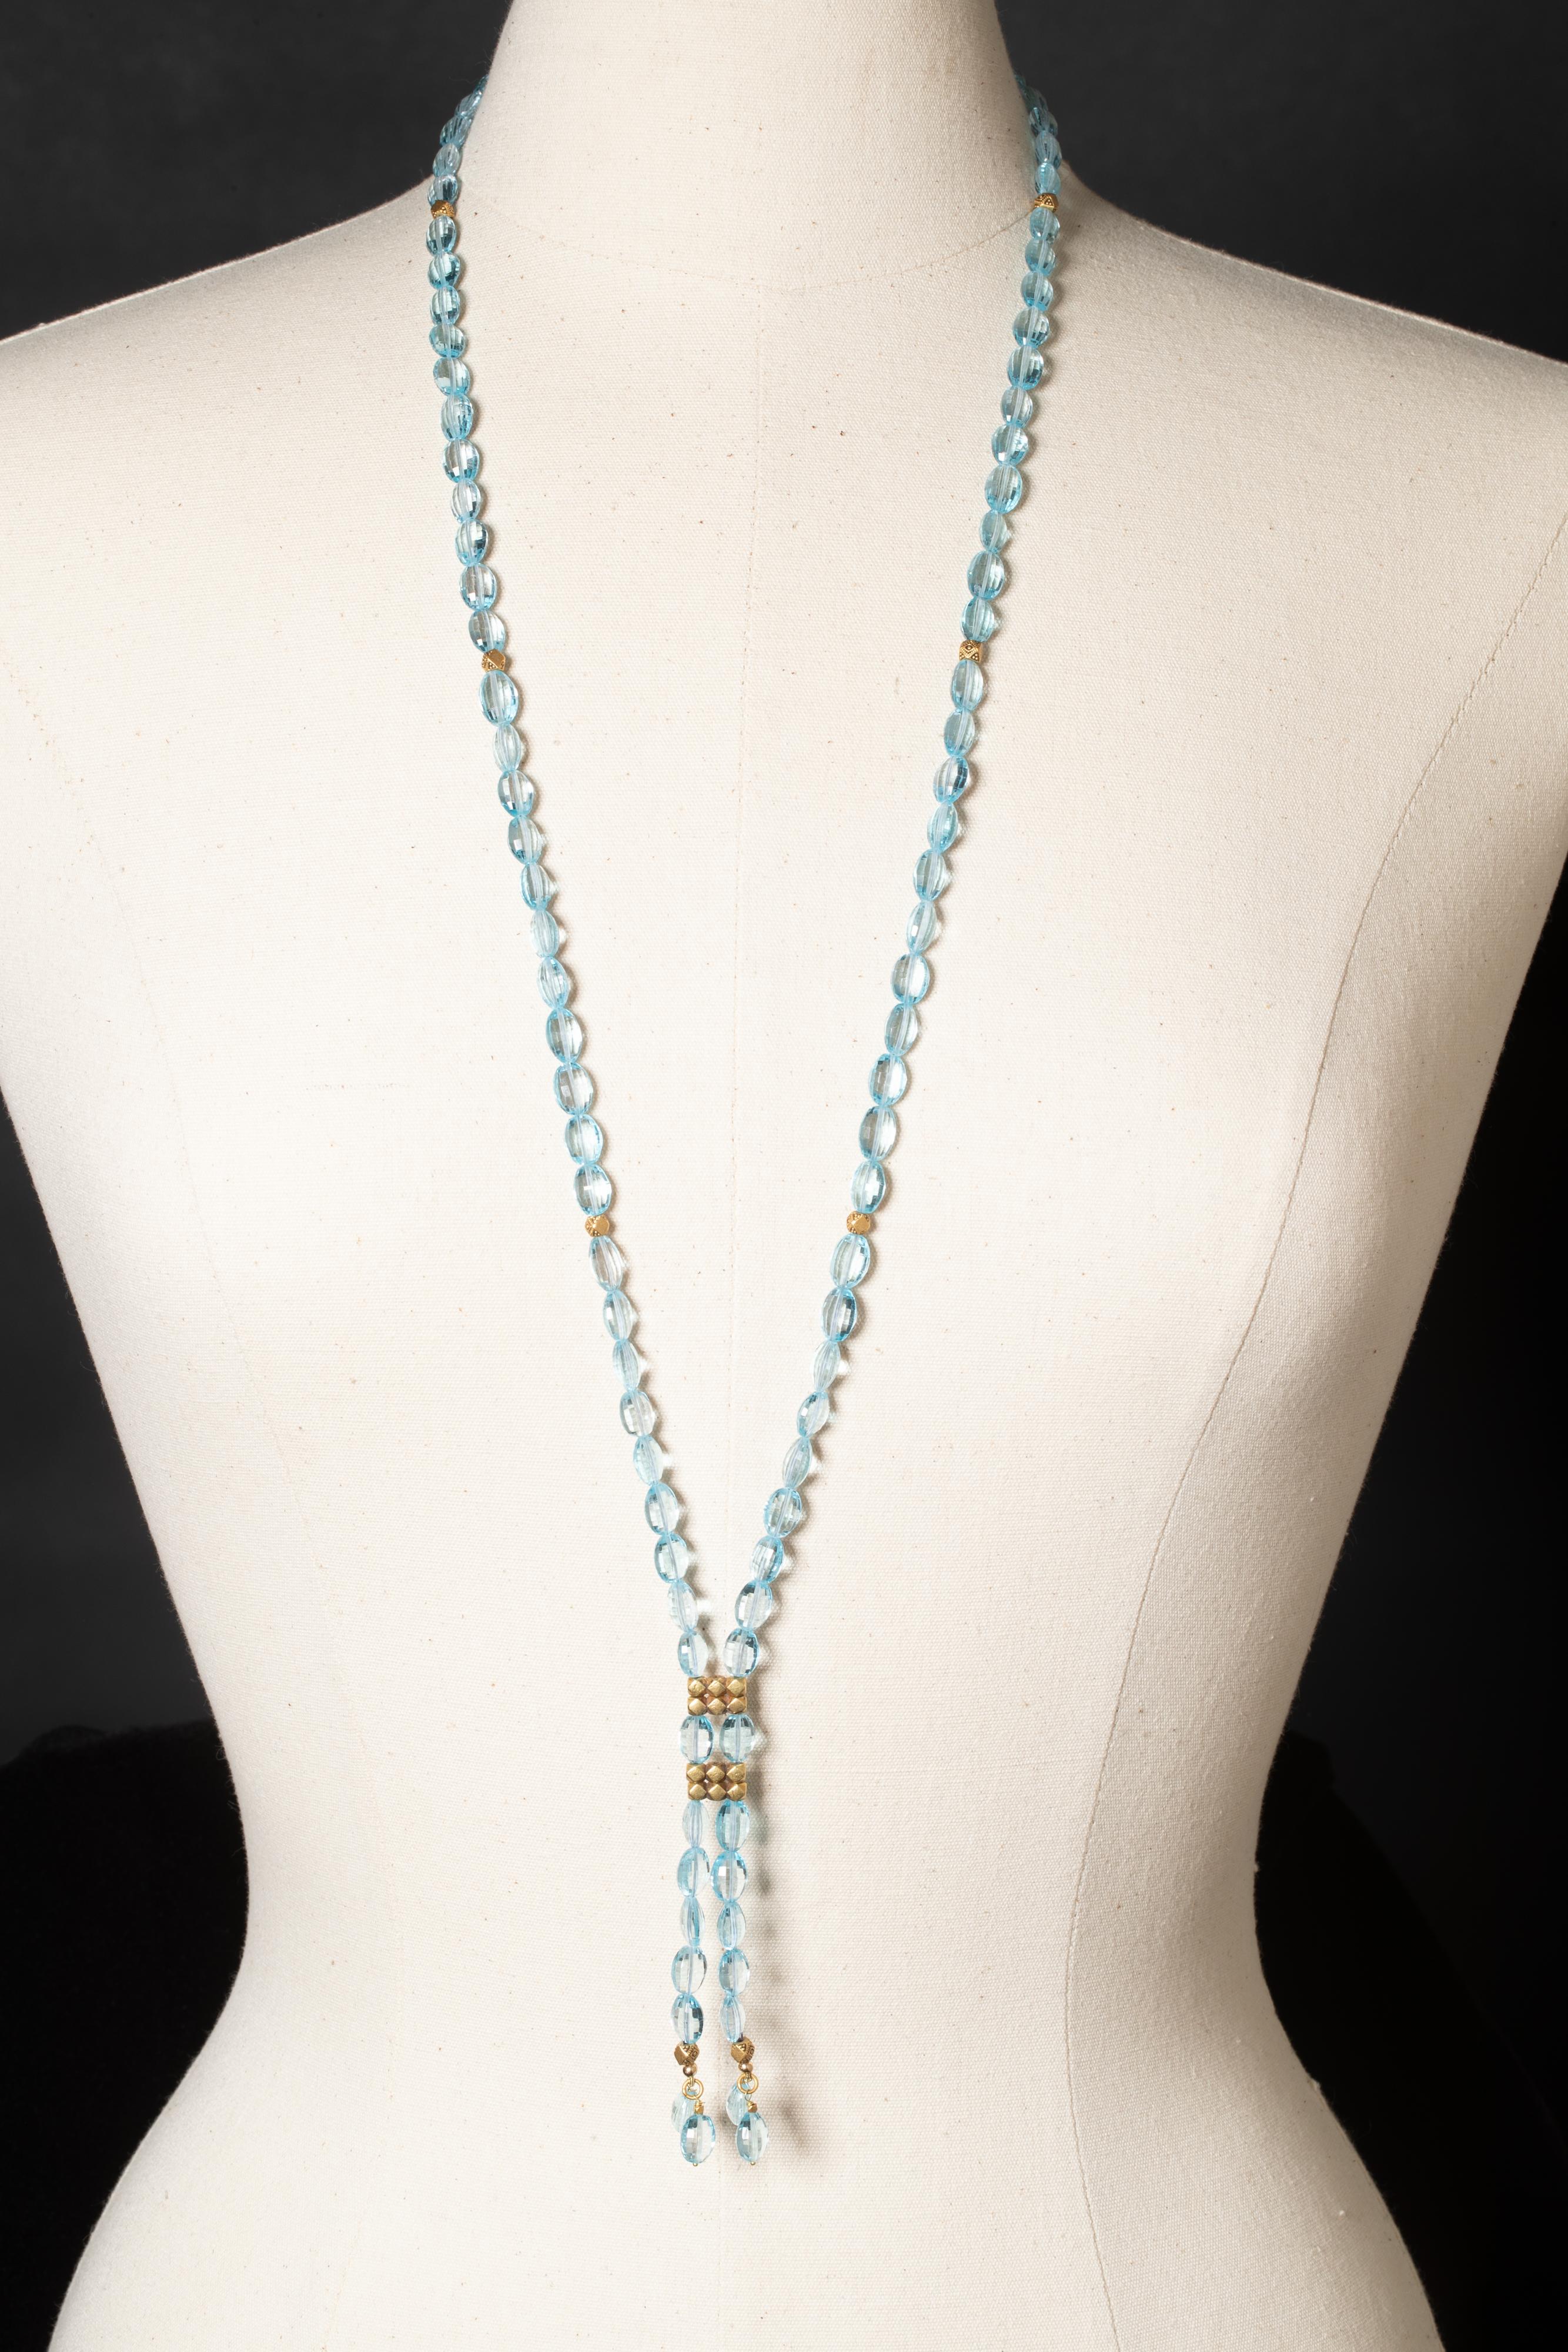 To be worn long or short, this very versatile lariat necklace features faceted blue, oval-shaped aquamarine beads with 22K gold beads with fine granulation work.  Worn long it is 42